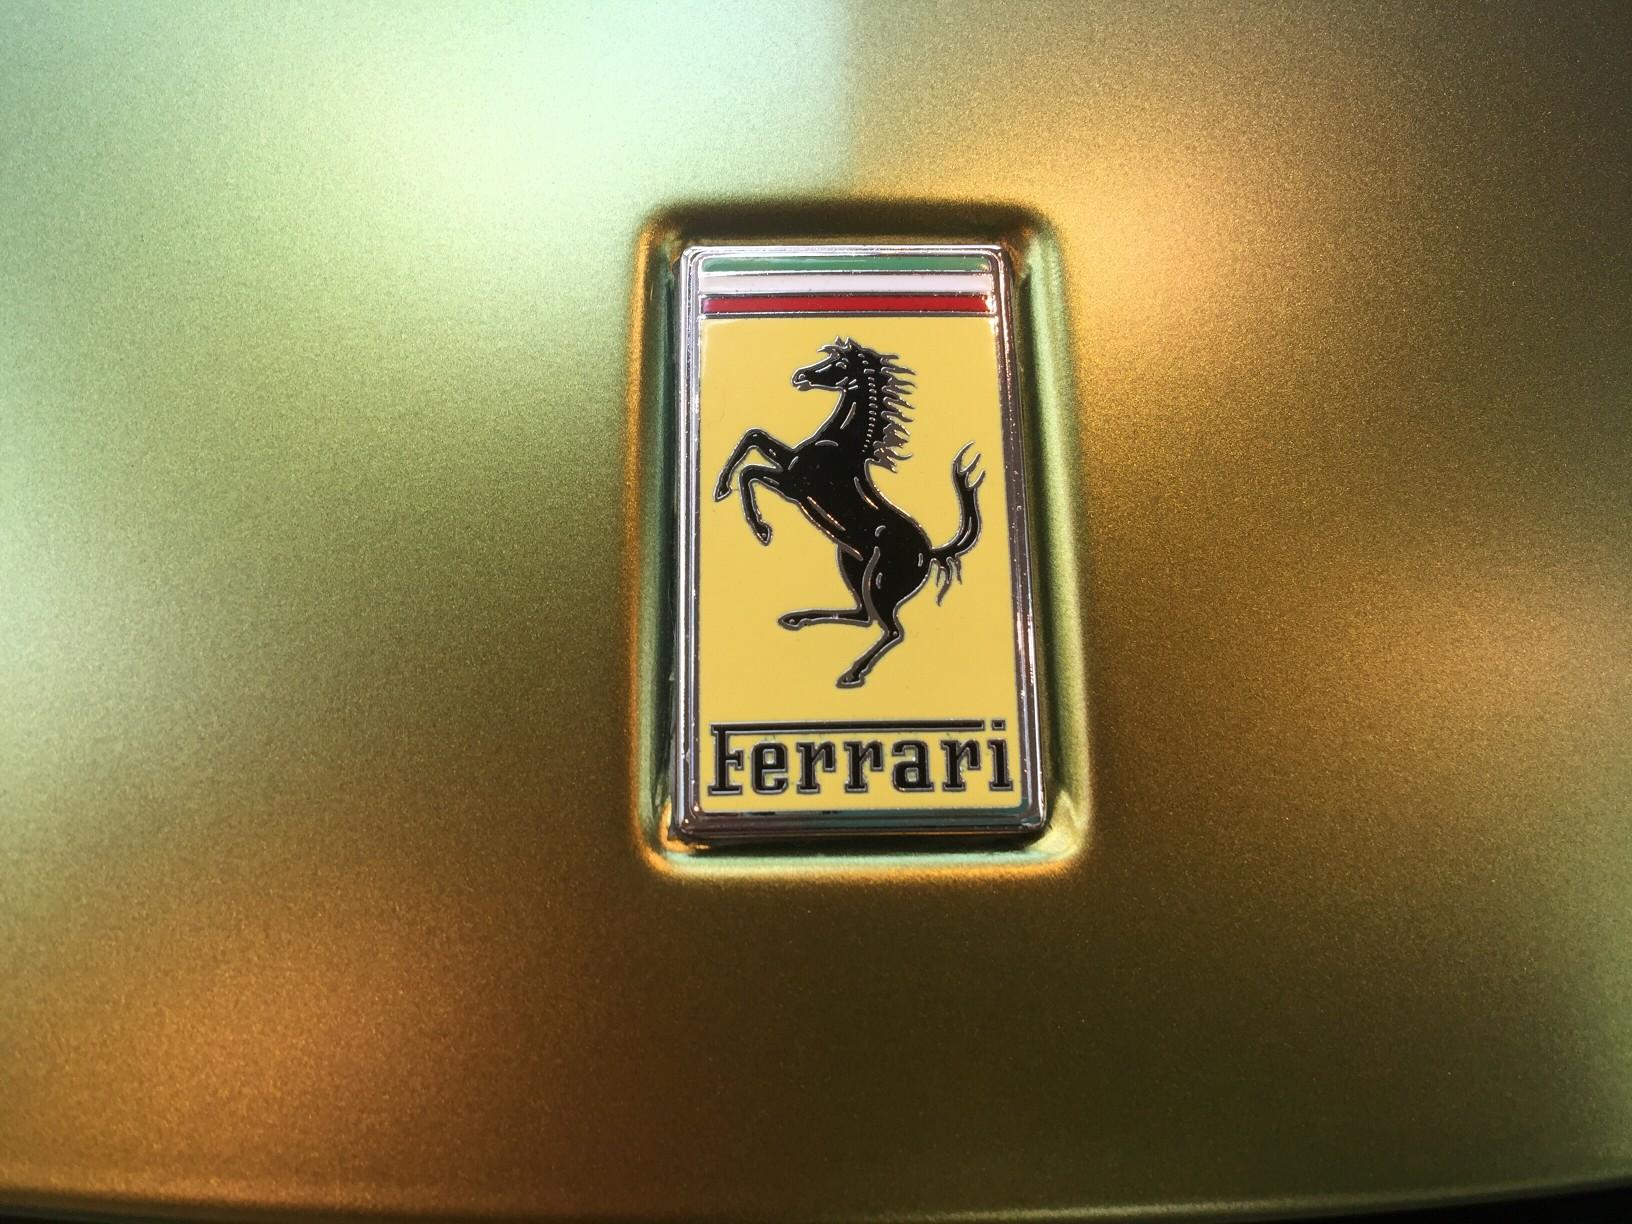 Ferrari hasn’t given many details about its new SUV.